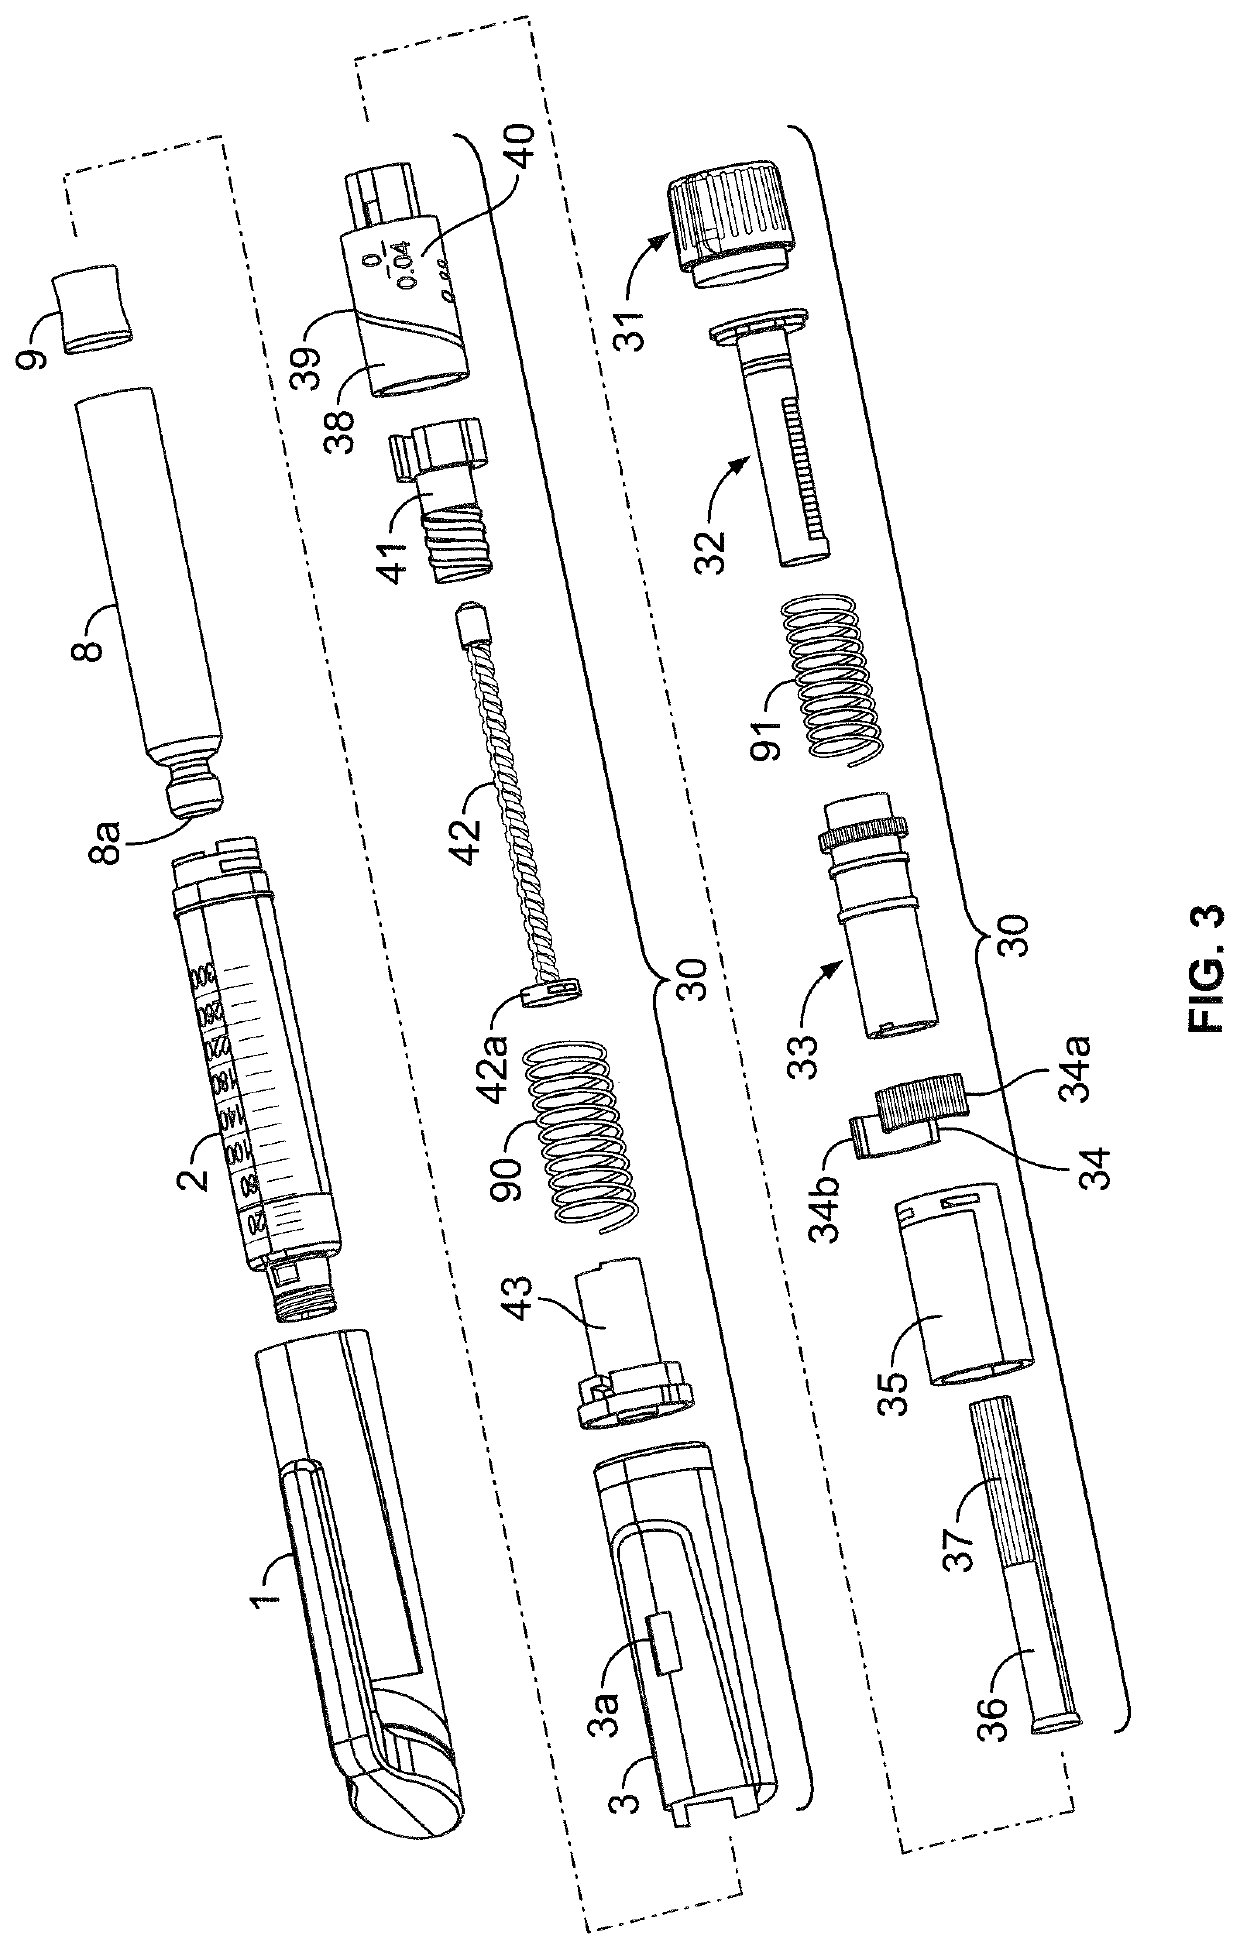 Injection device with flexible dose selection